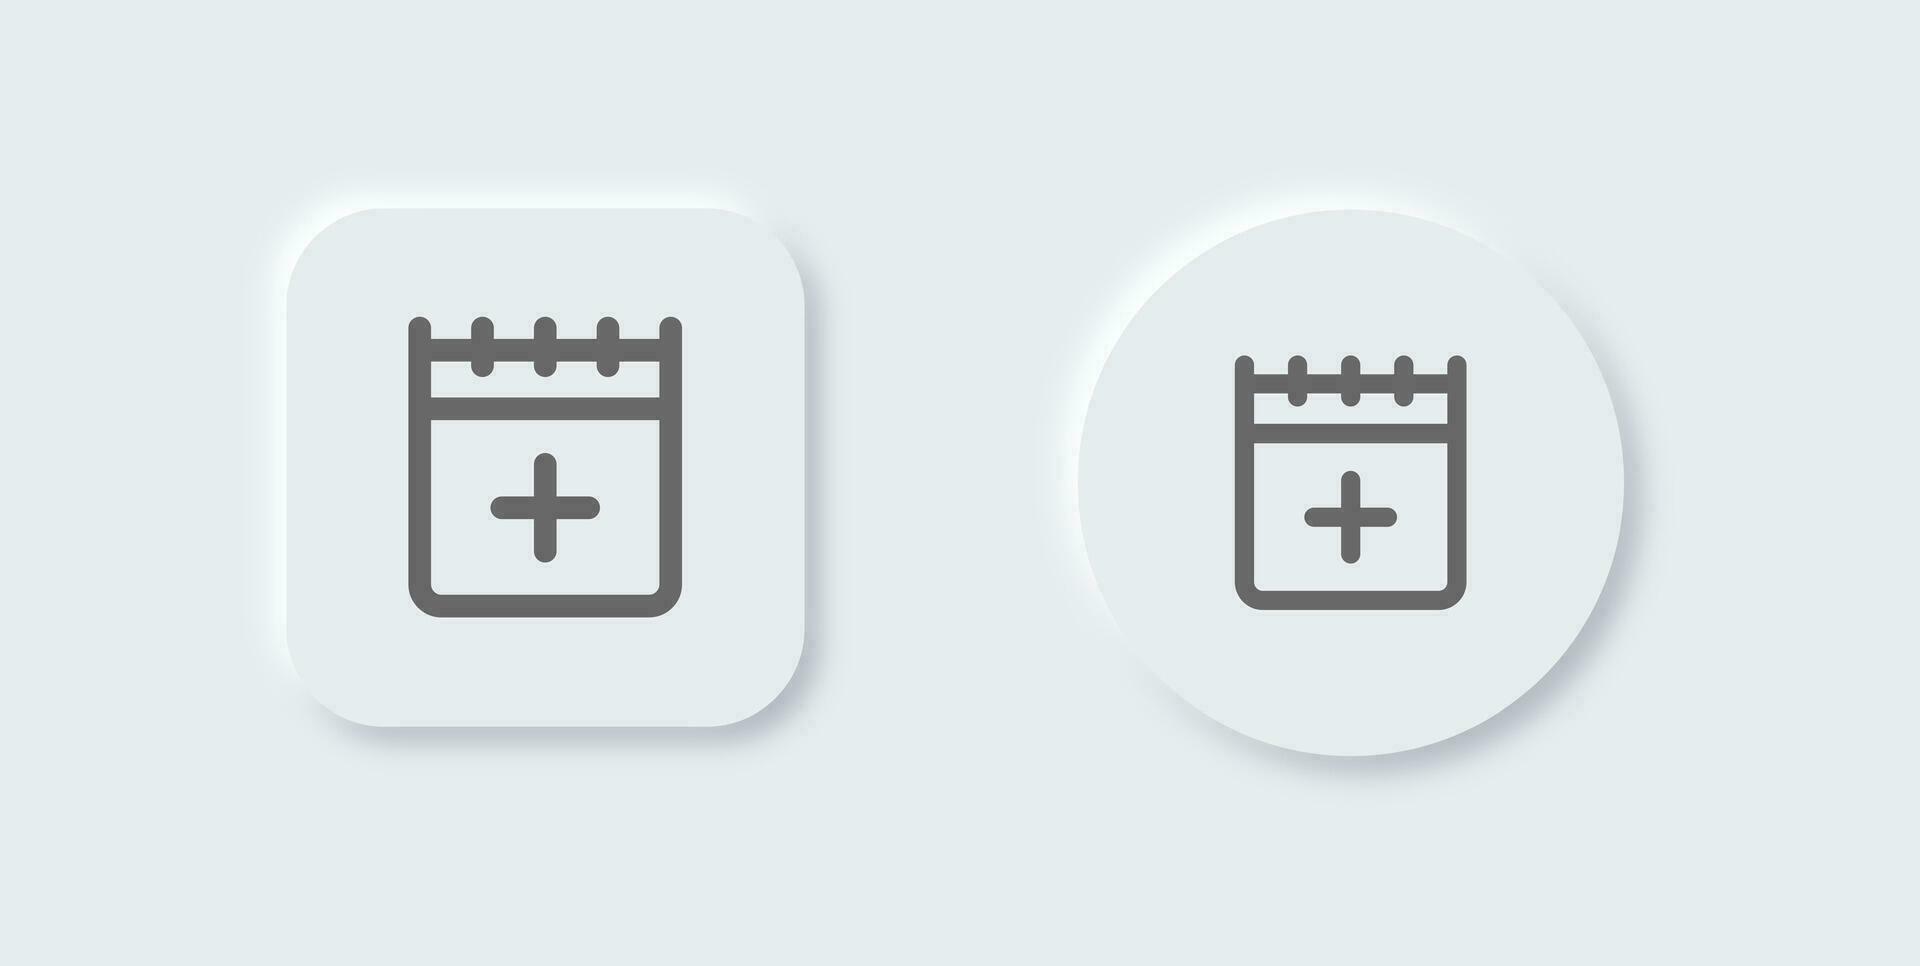 Add event line icon in neomorphic design style. Schedule signs vector illustration.